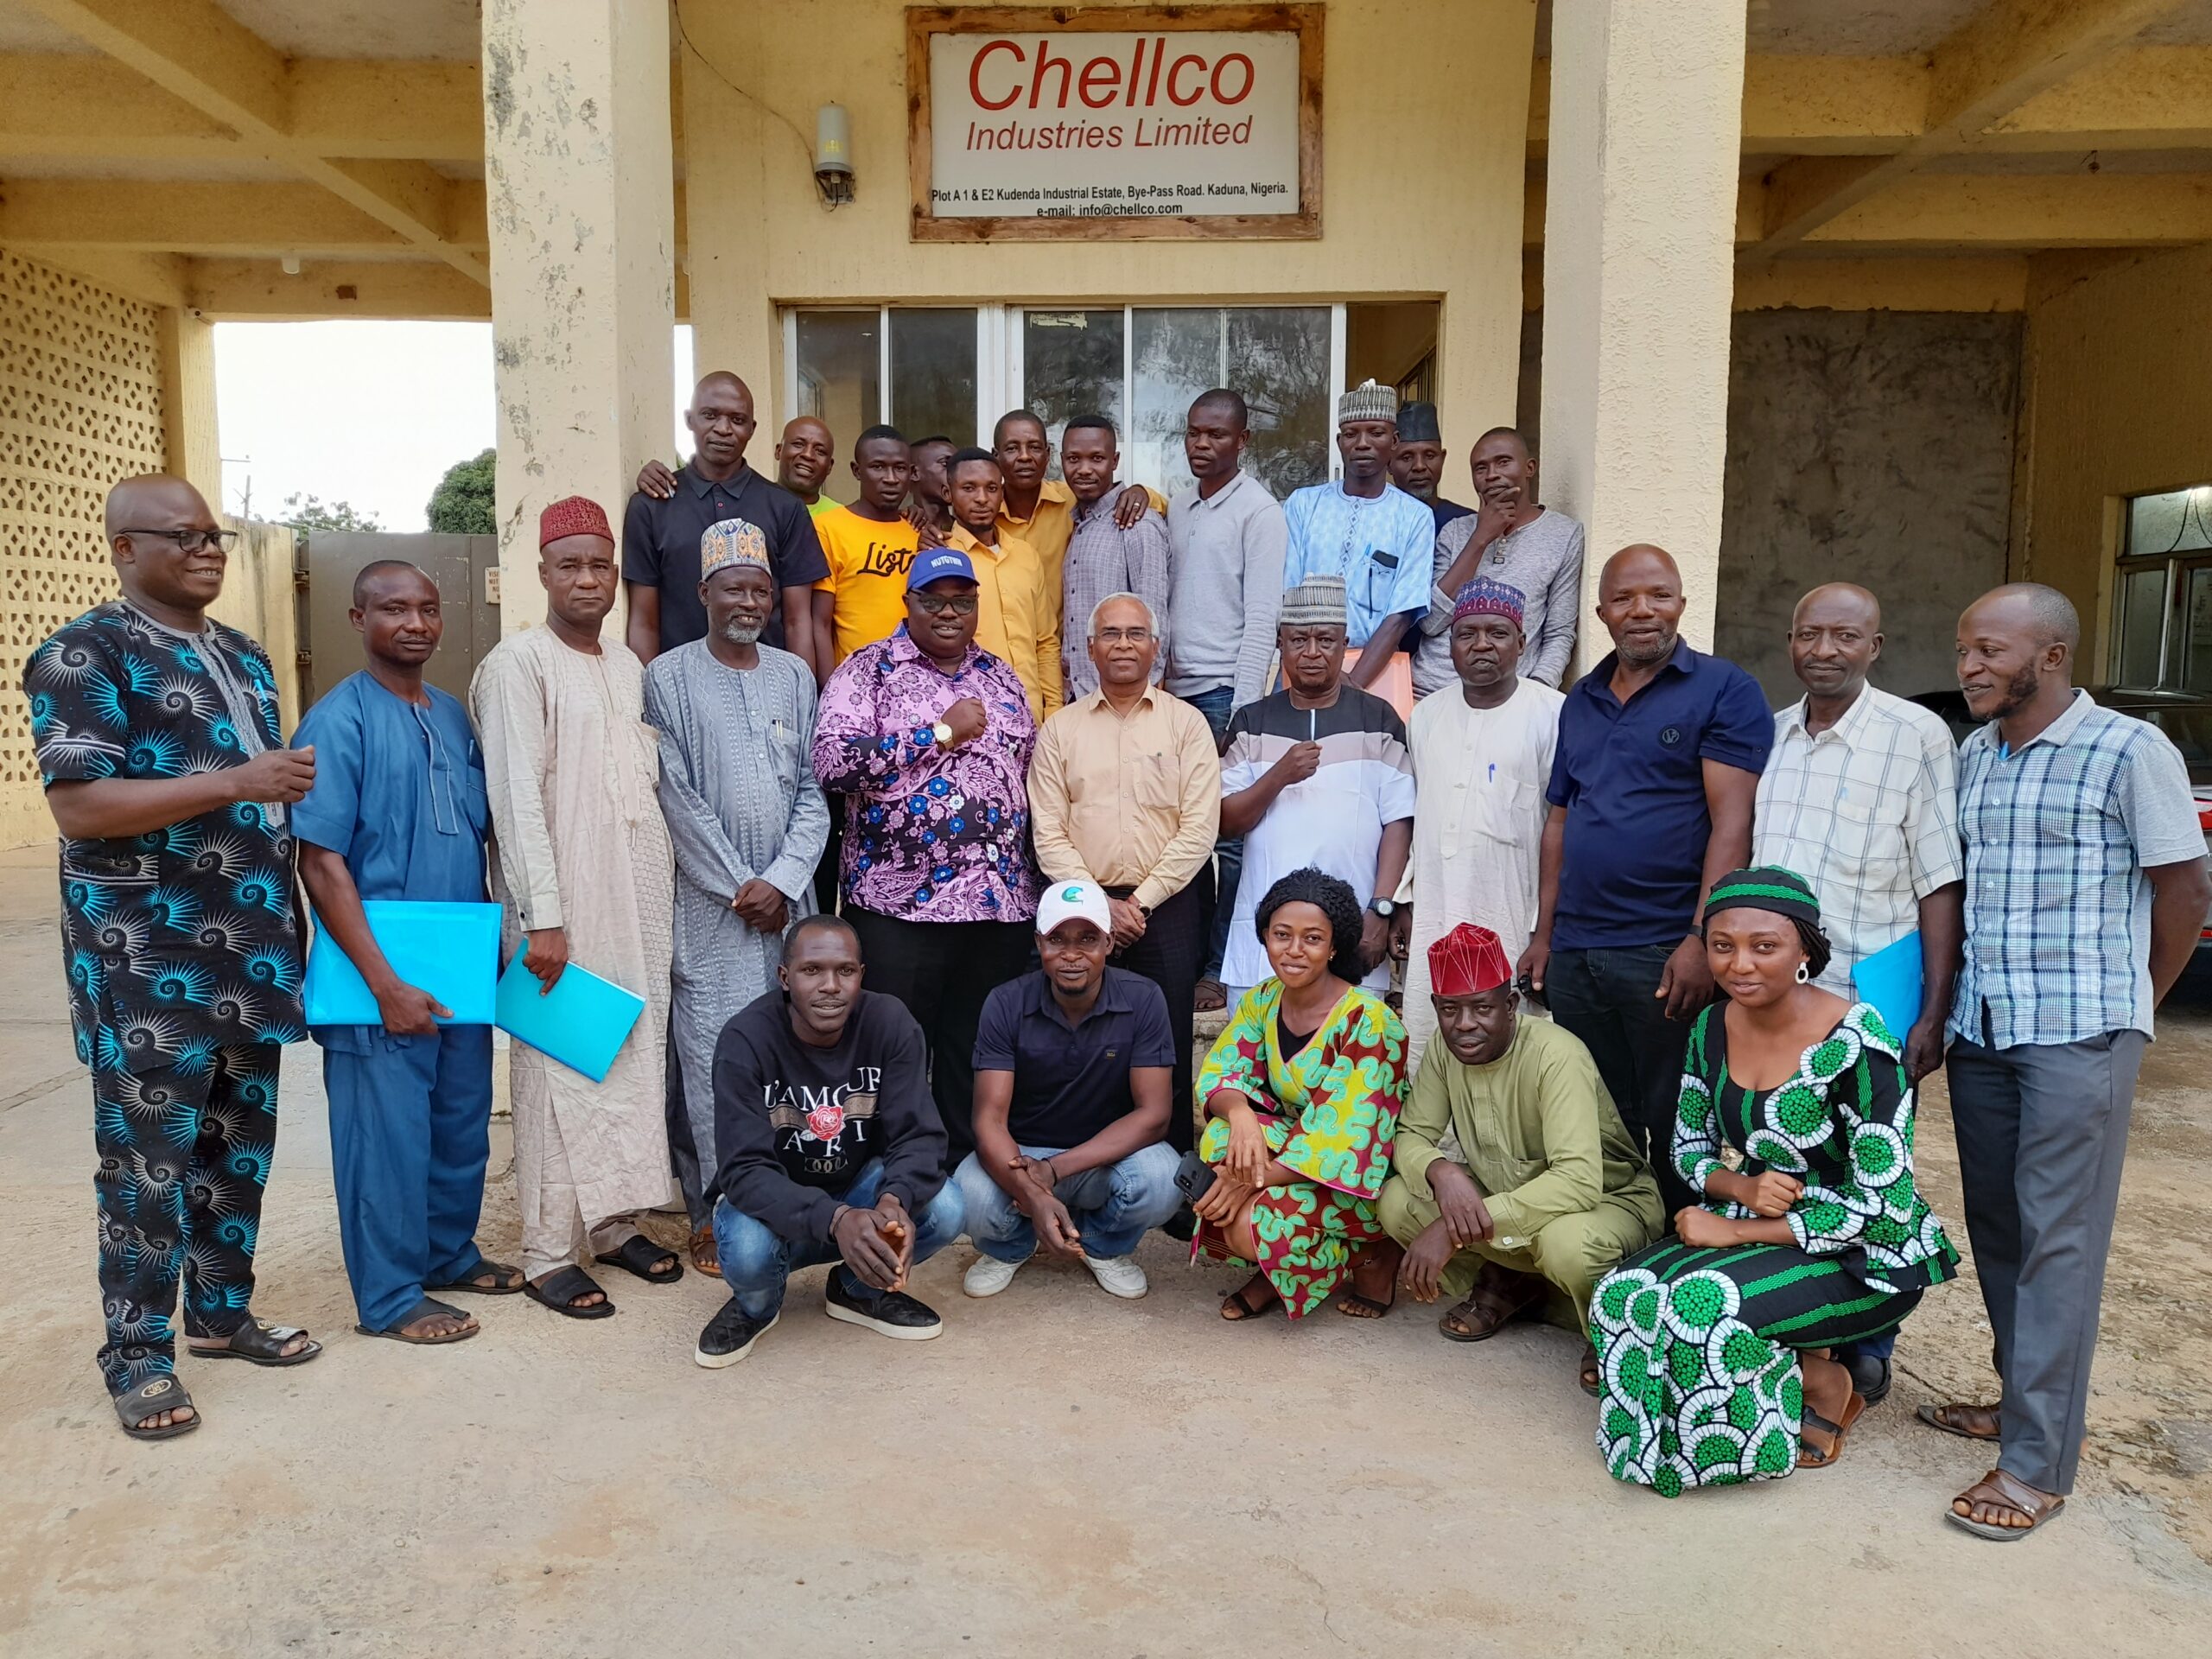 National Union of Textile Garment and Tailoring Workers of Nigeria held a Training on Occupational Safety and Health and Productivity Improvement